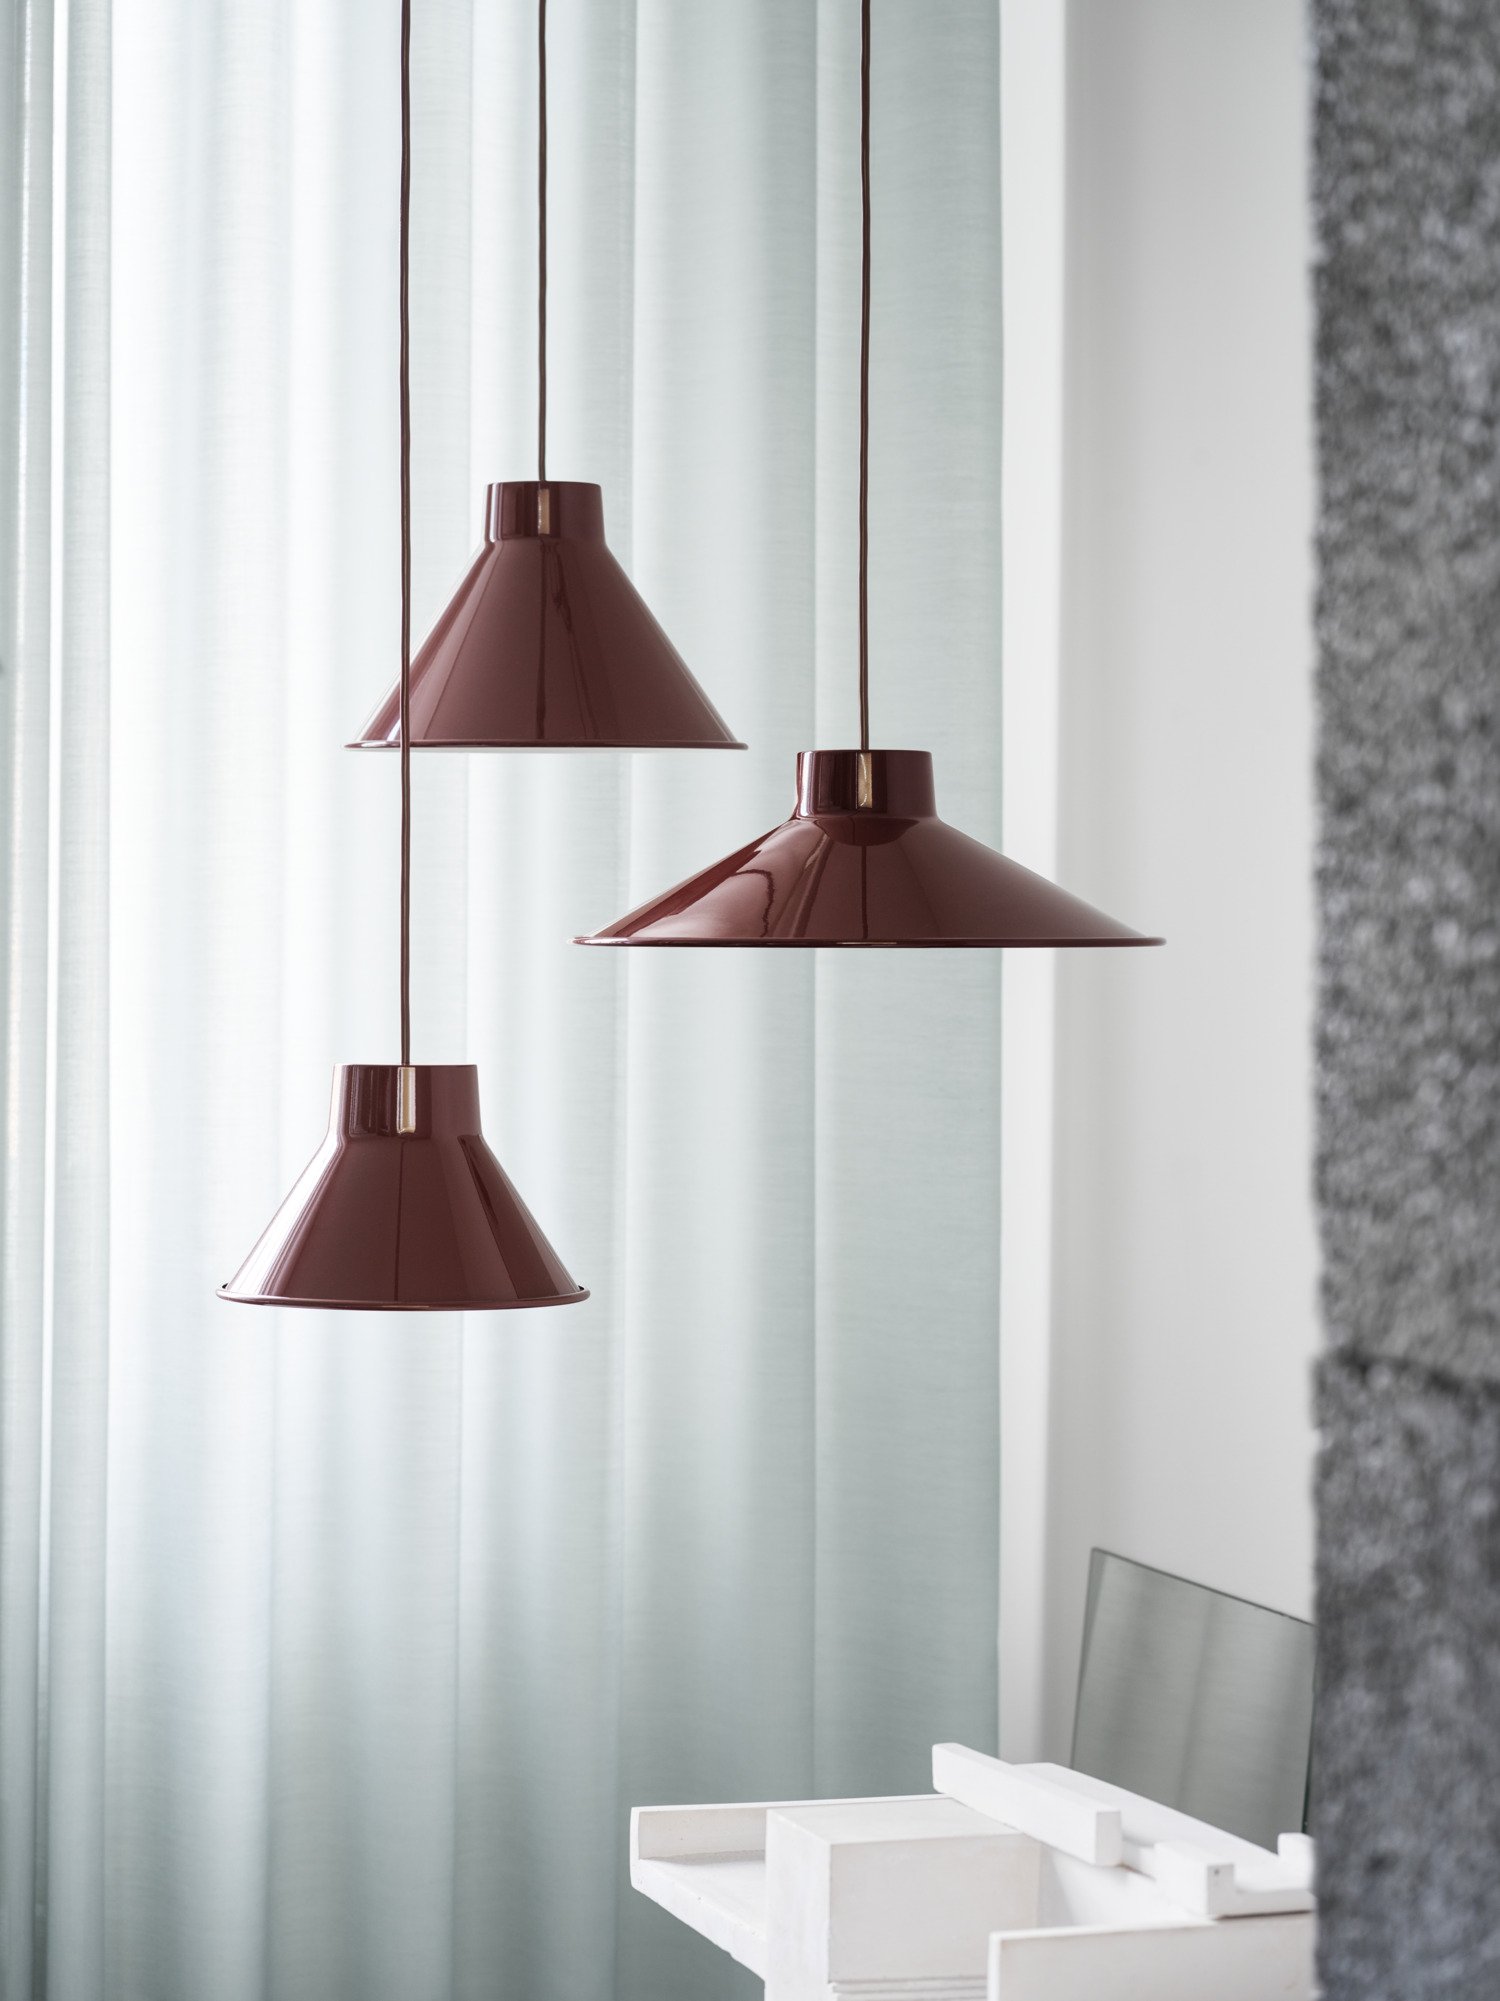 Top Pendant Lamp in Deep Red Ø21, Ø28, and Ø36 